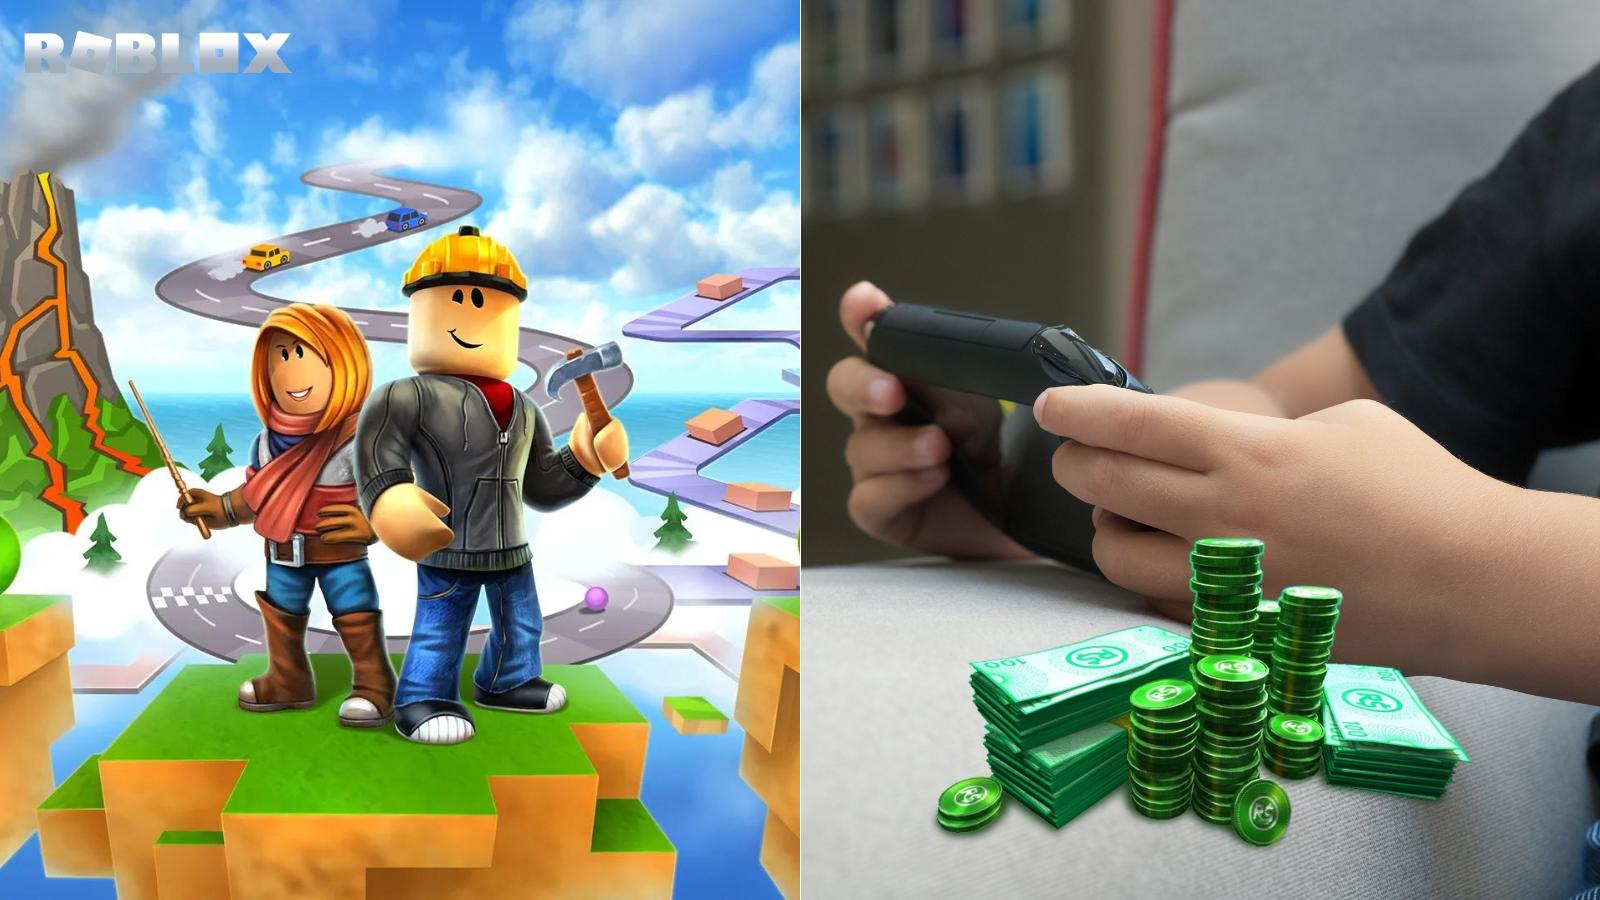 Roblox facilitates “illegal gambling” for minors, according to new lawsuit